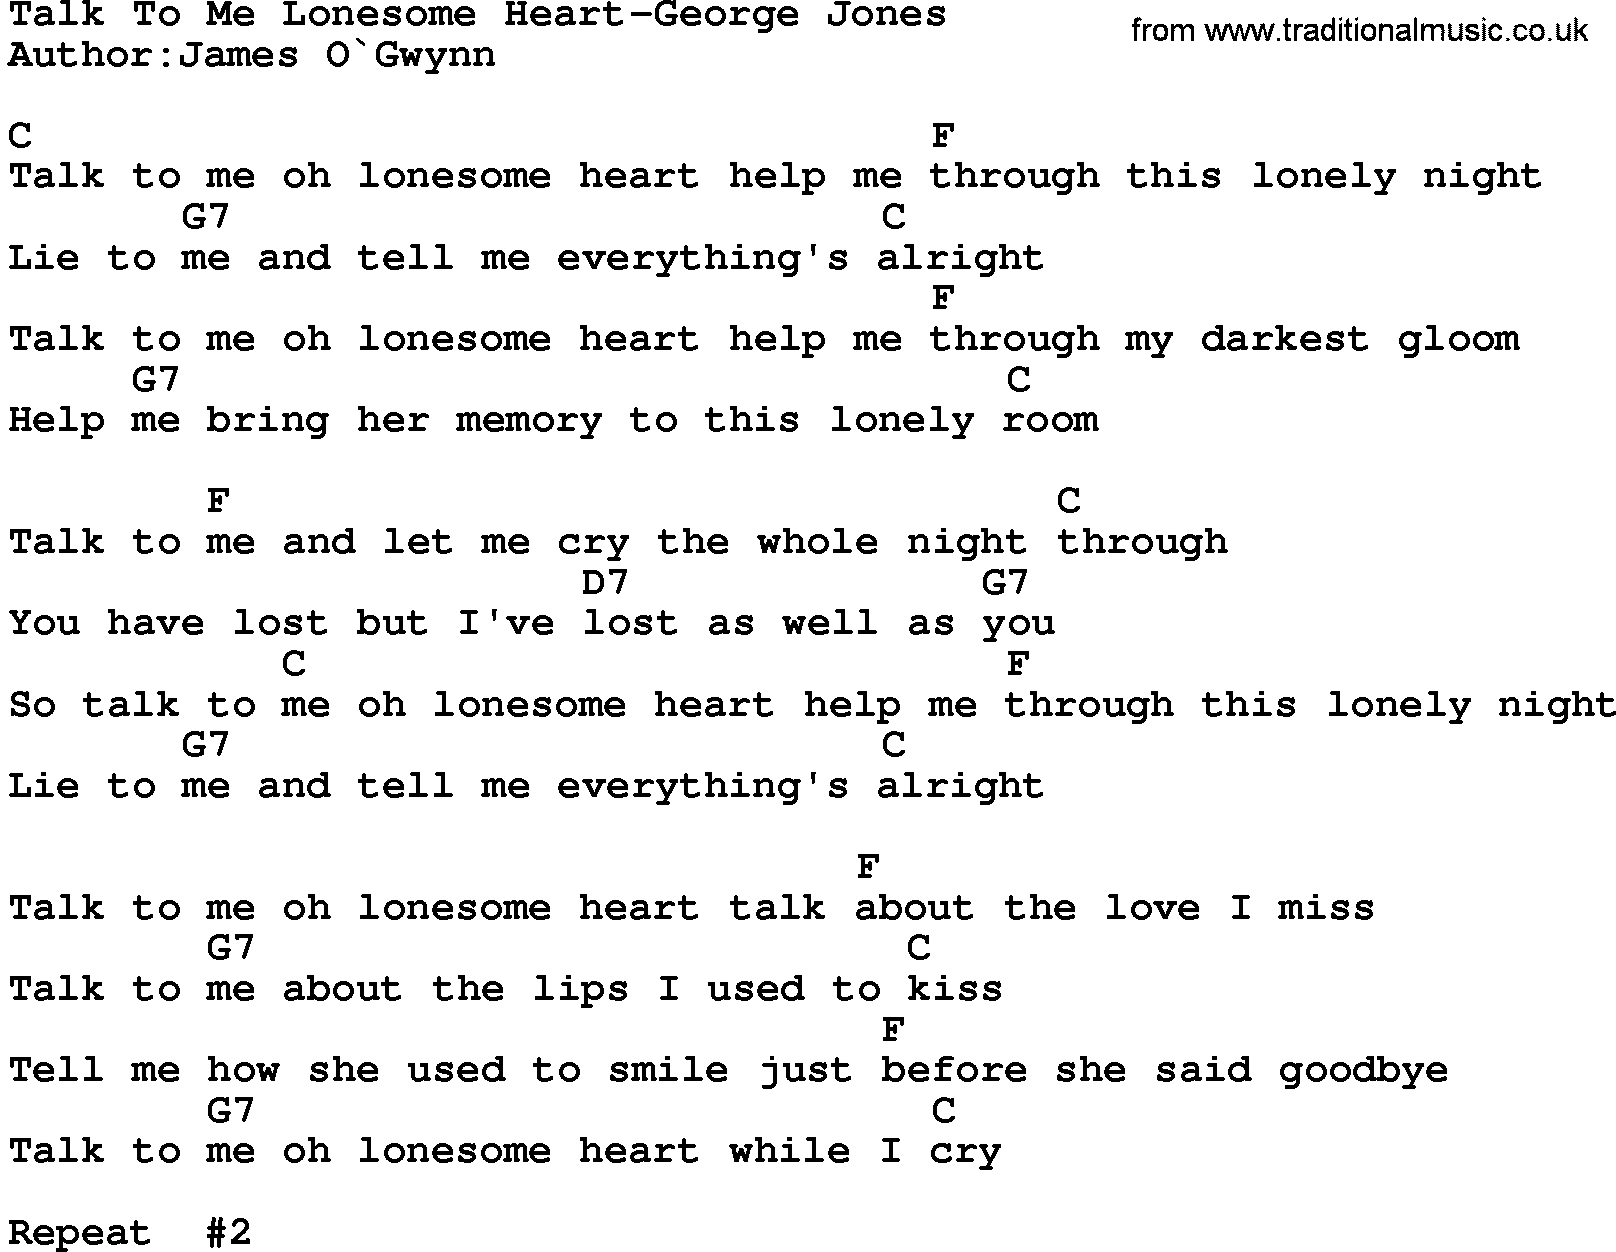 Country music song: Talk To Me Lonesome Heart-George Jones lyrics and chords